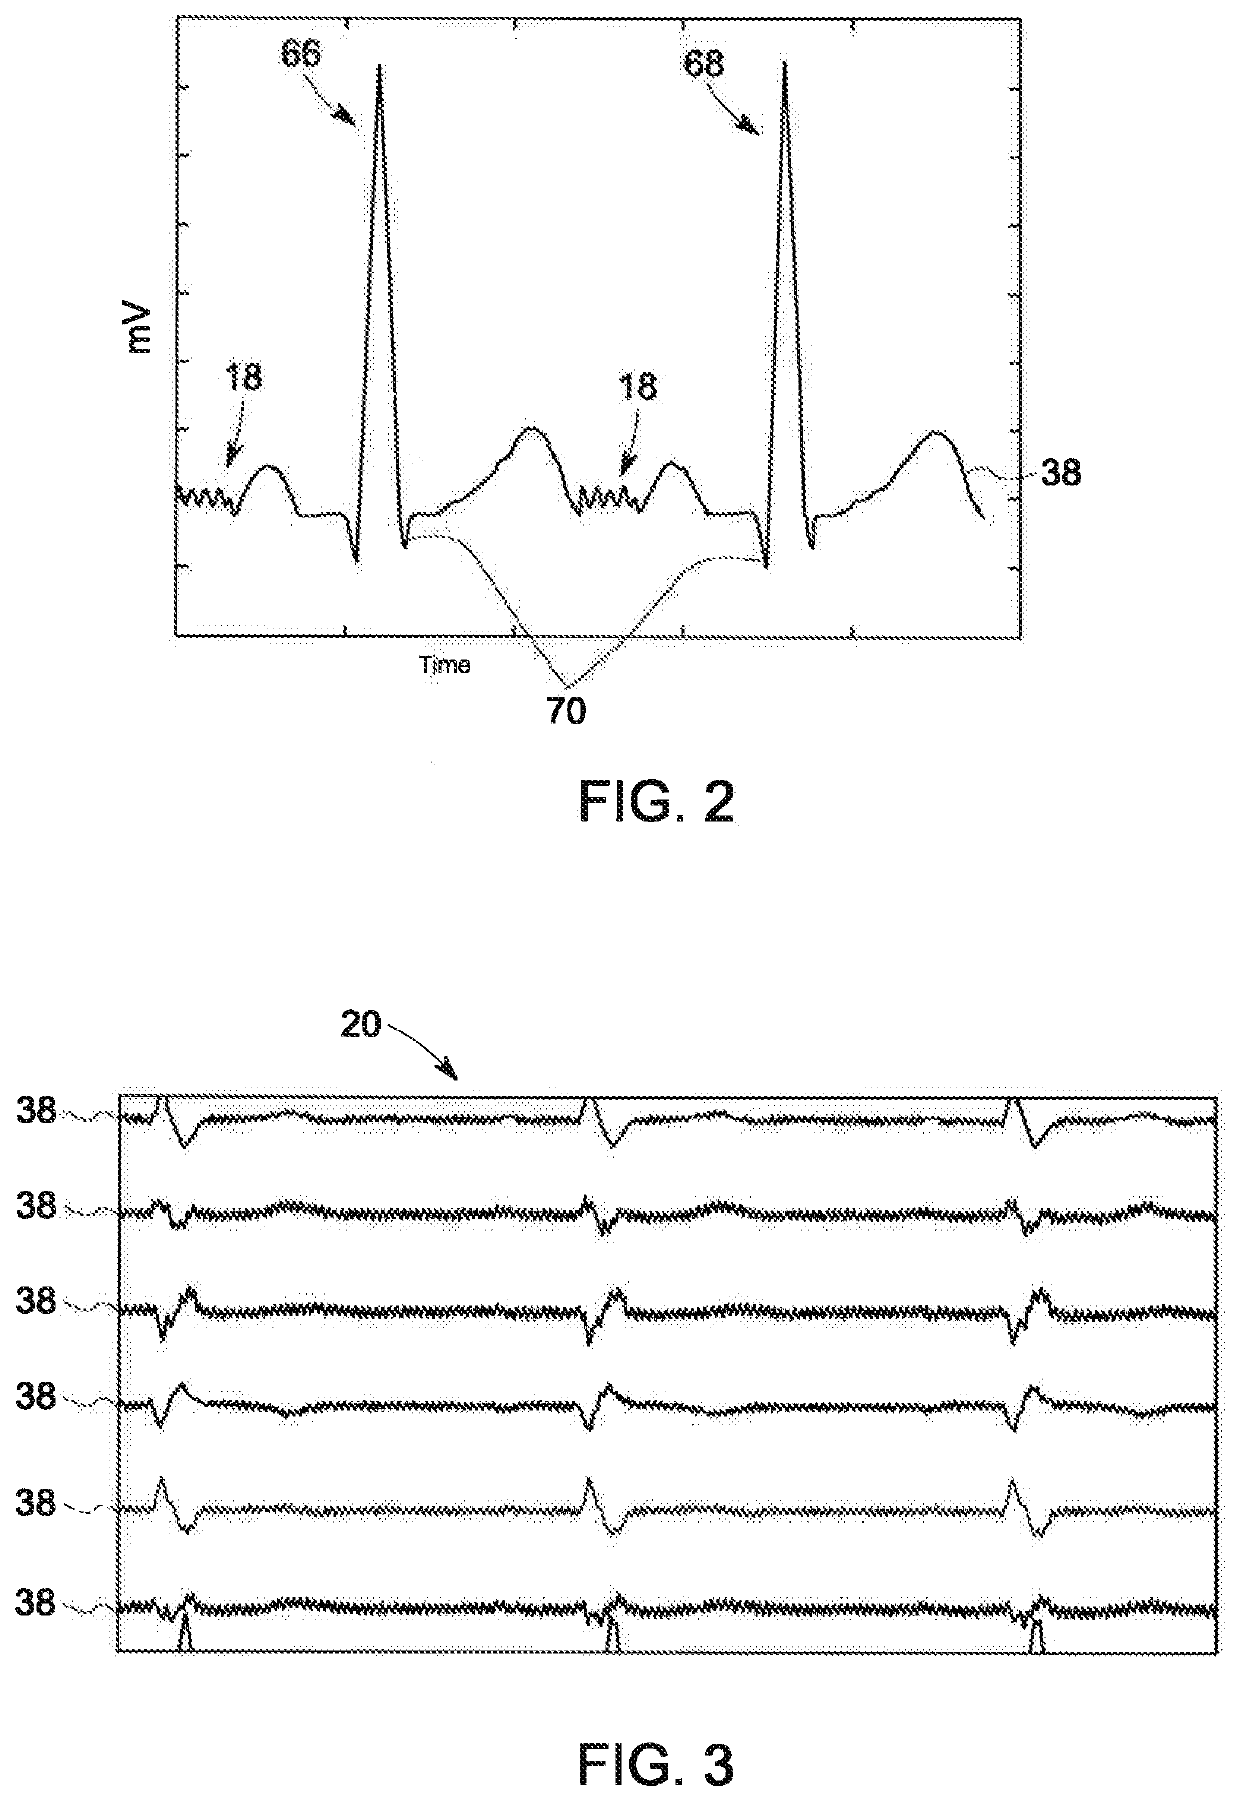 System and method for analyzing noise in electrophysiology studies